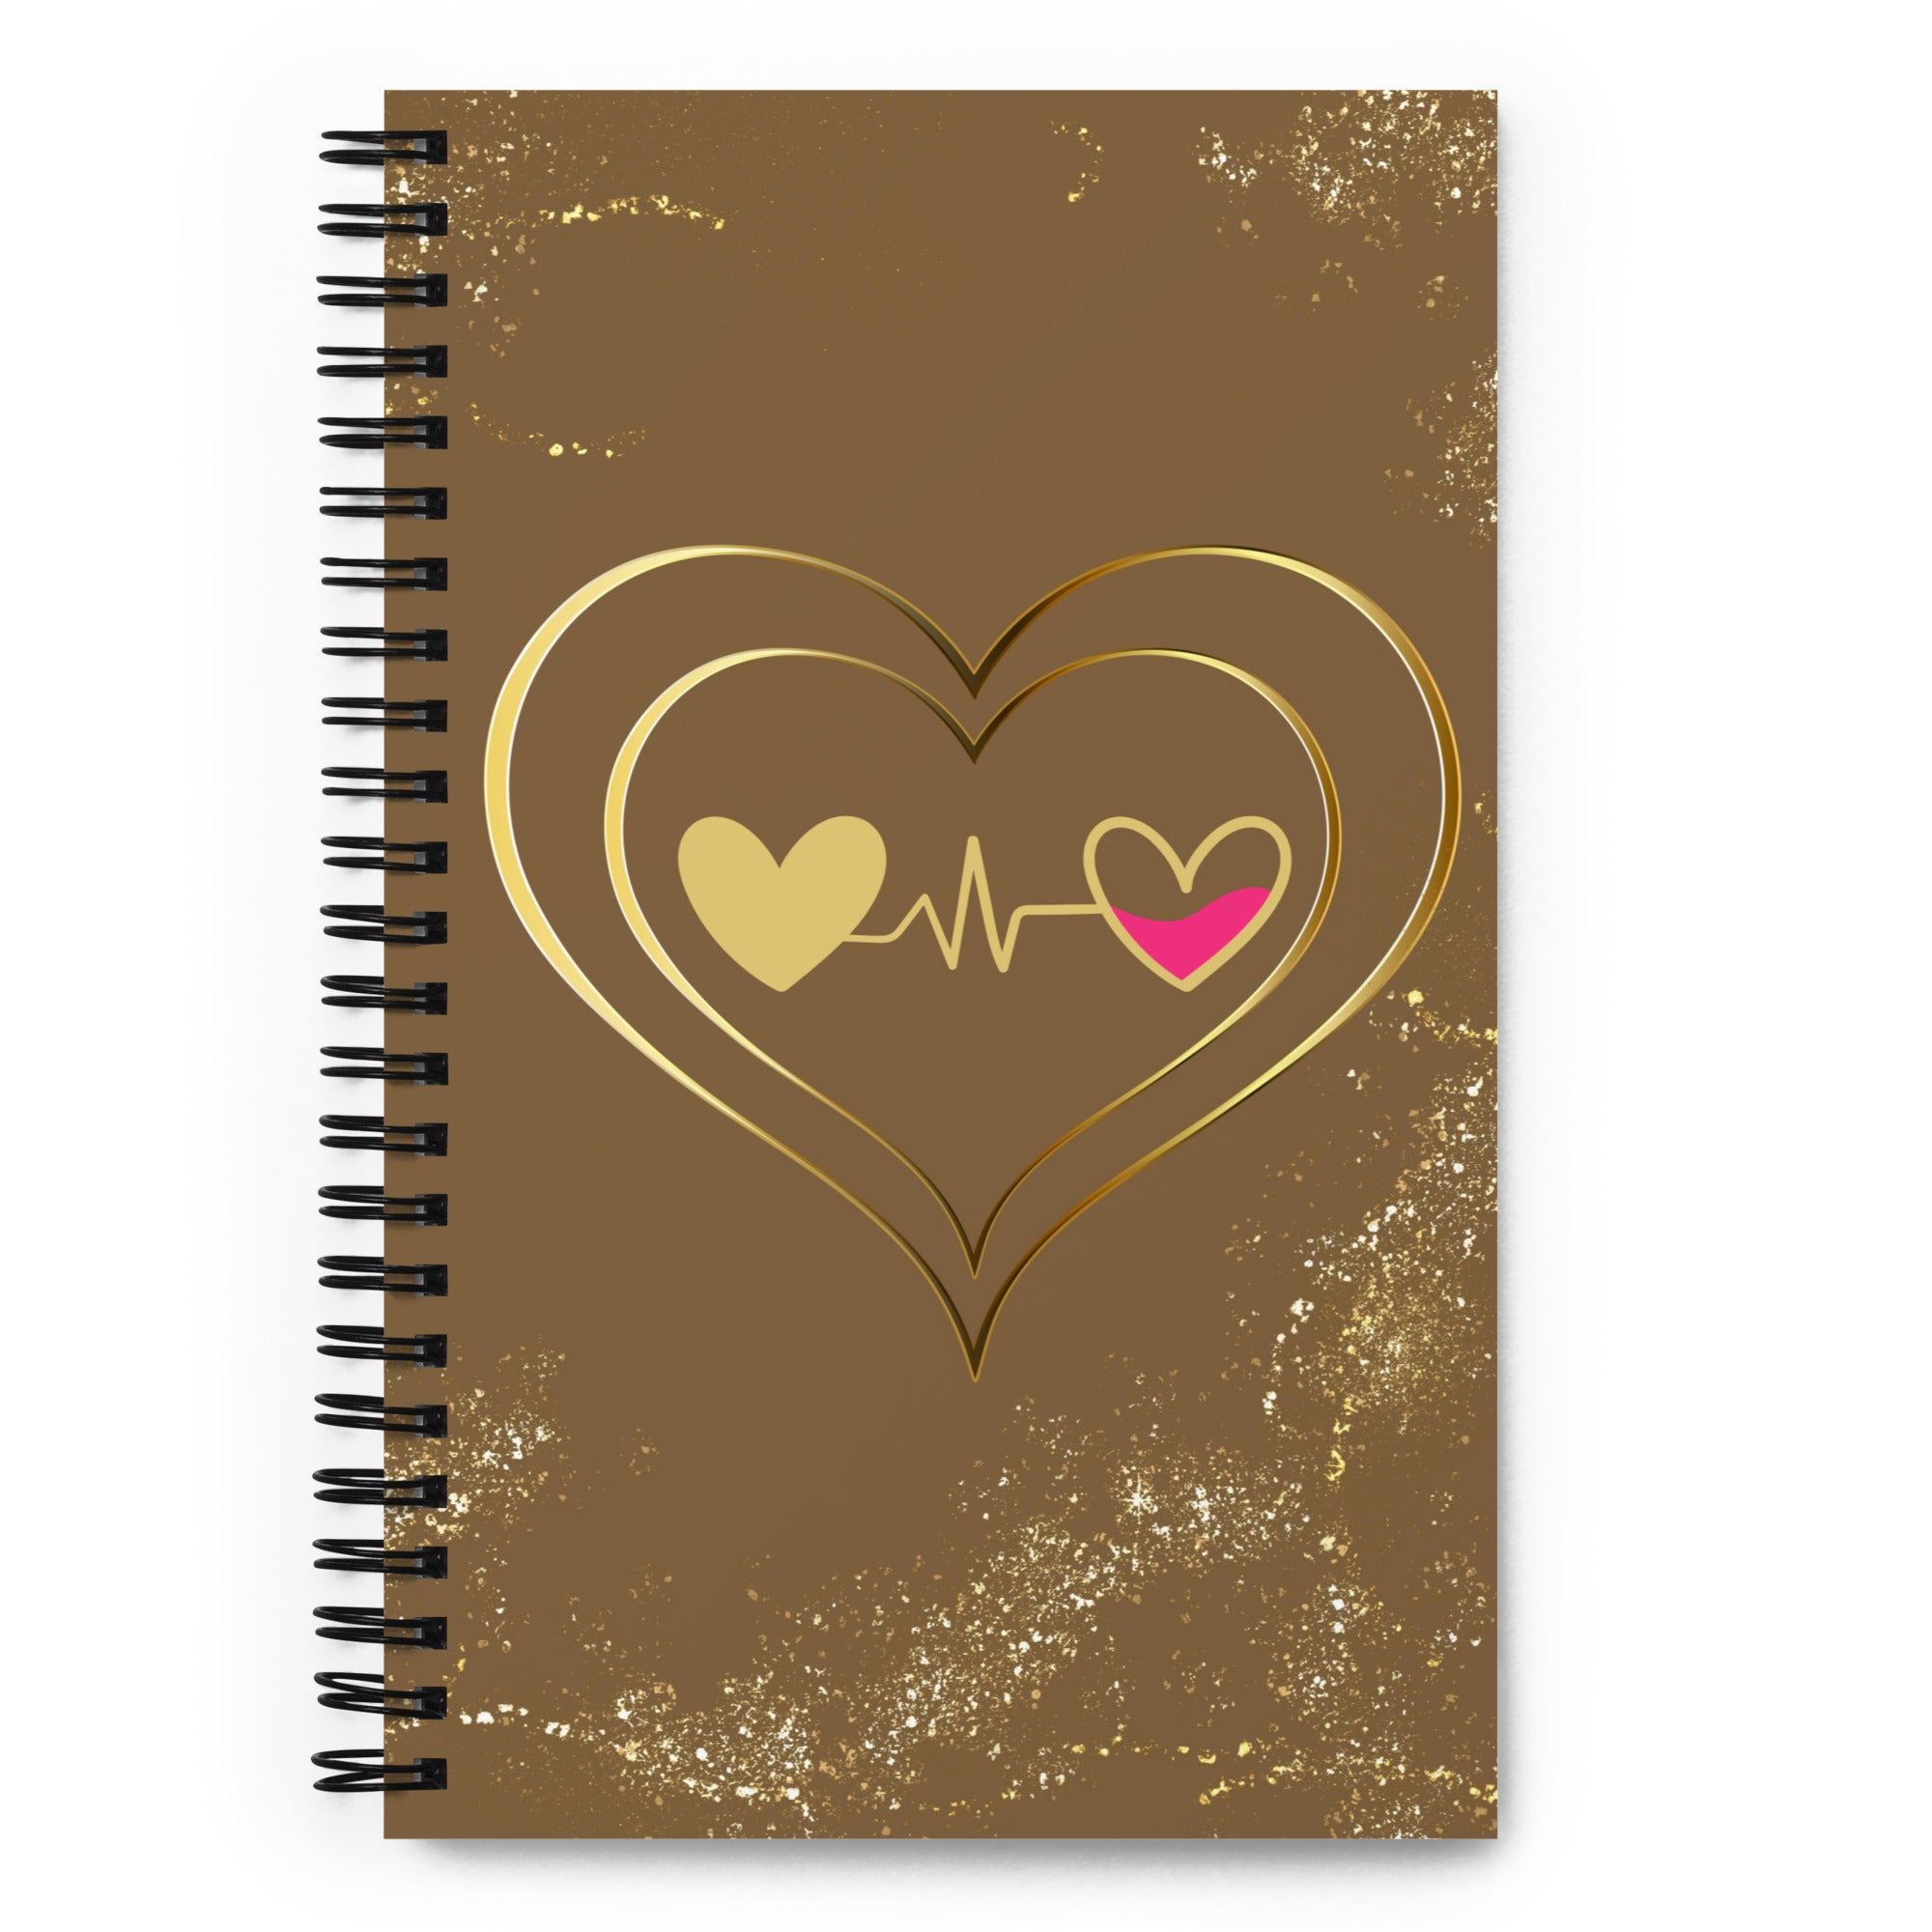 Connected Heart Spiral notebook